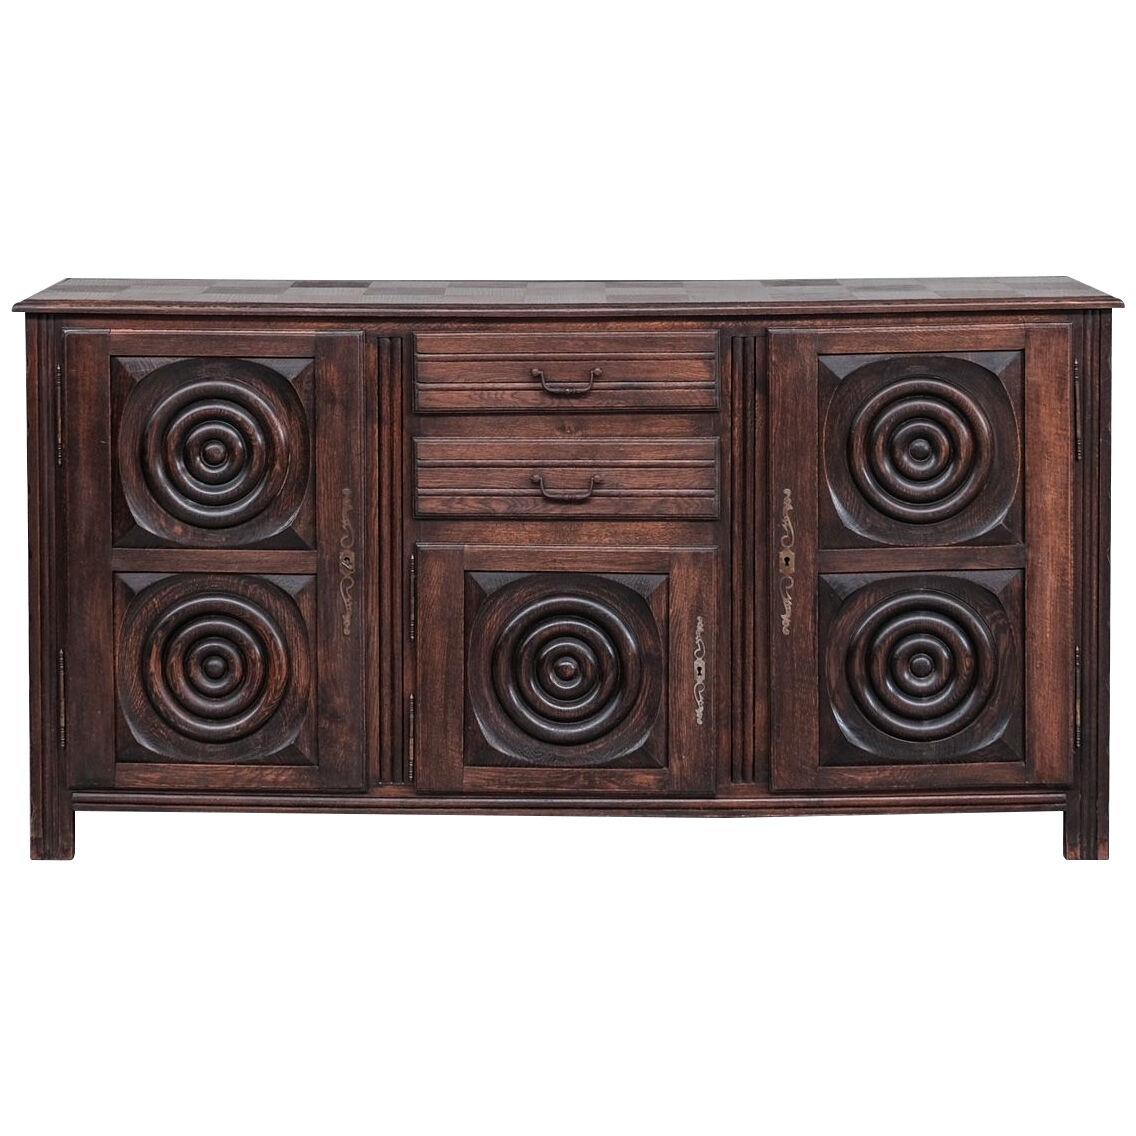 Dudouyt Style Art Deco French Sideboard or Credenza